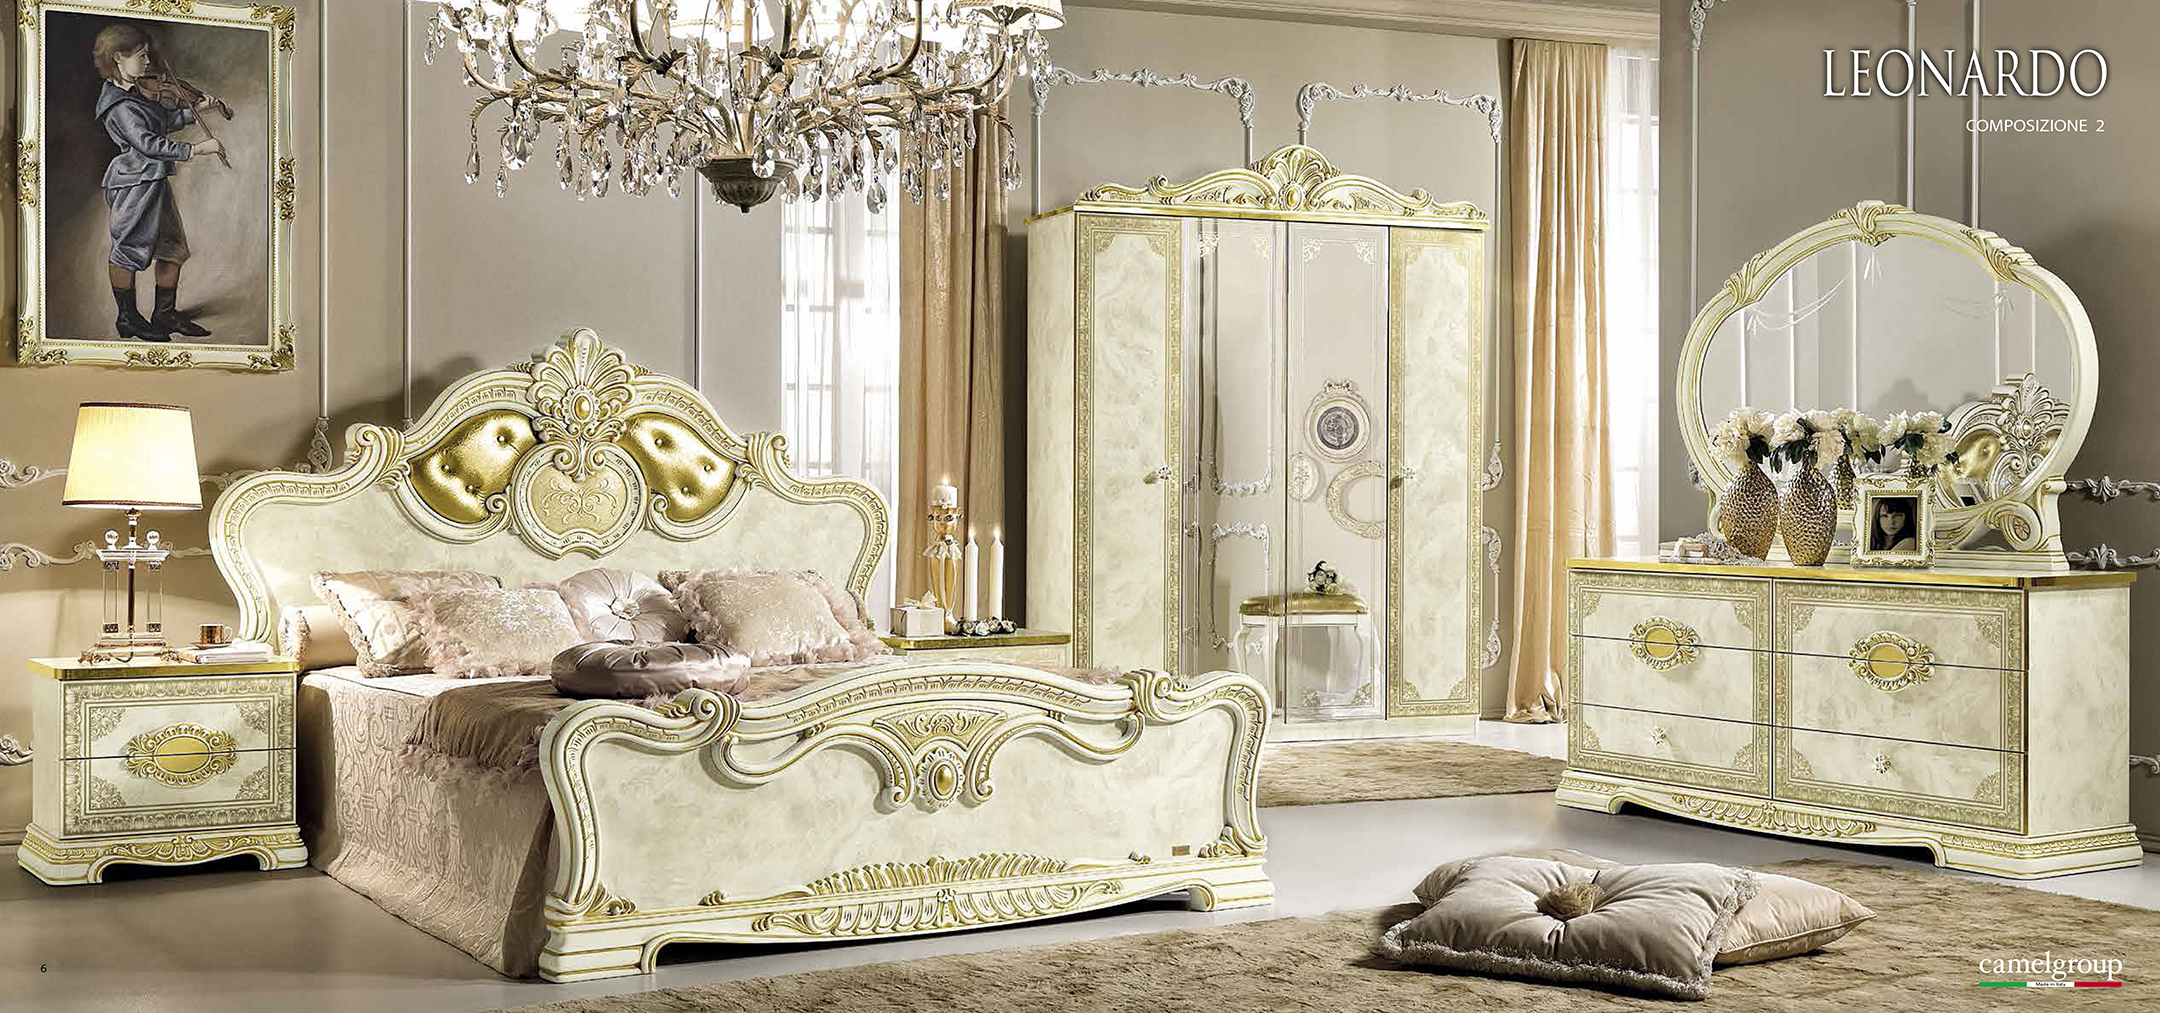 Brands Camel Classic Collection, Italy Leonardo Bedroom Additional Items